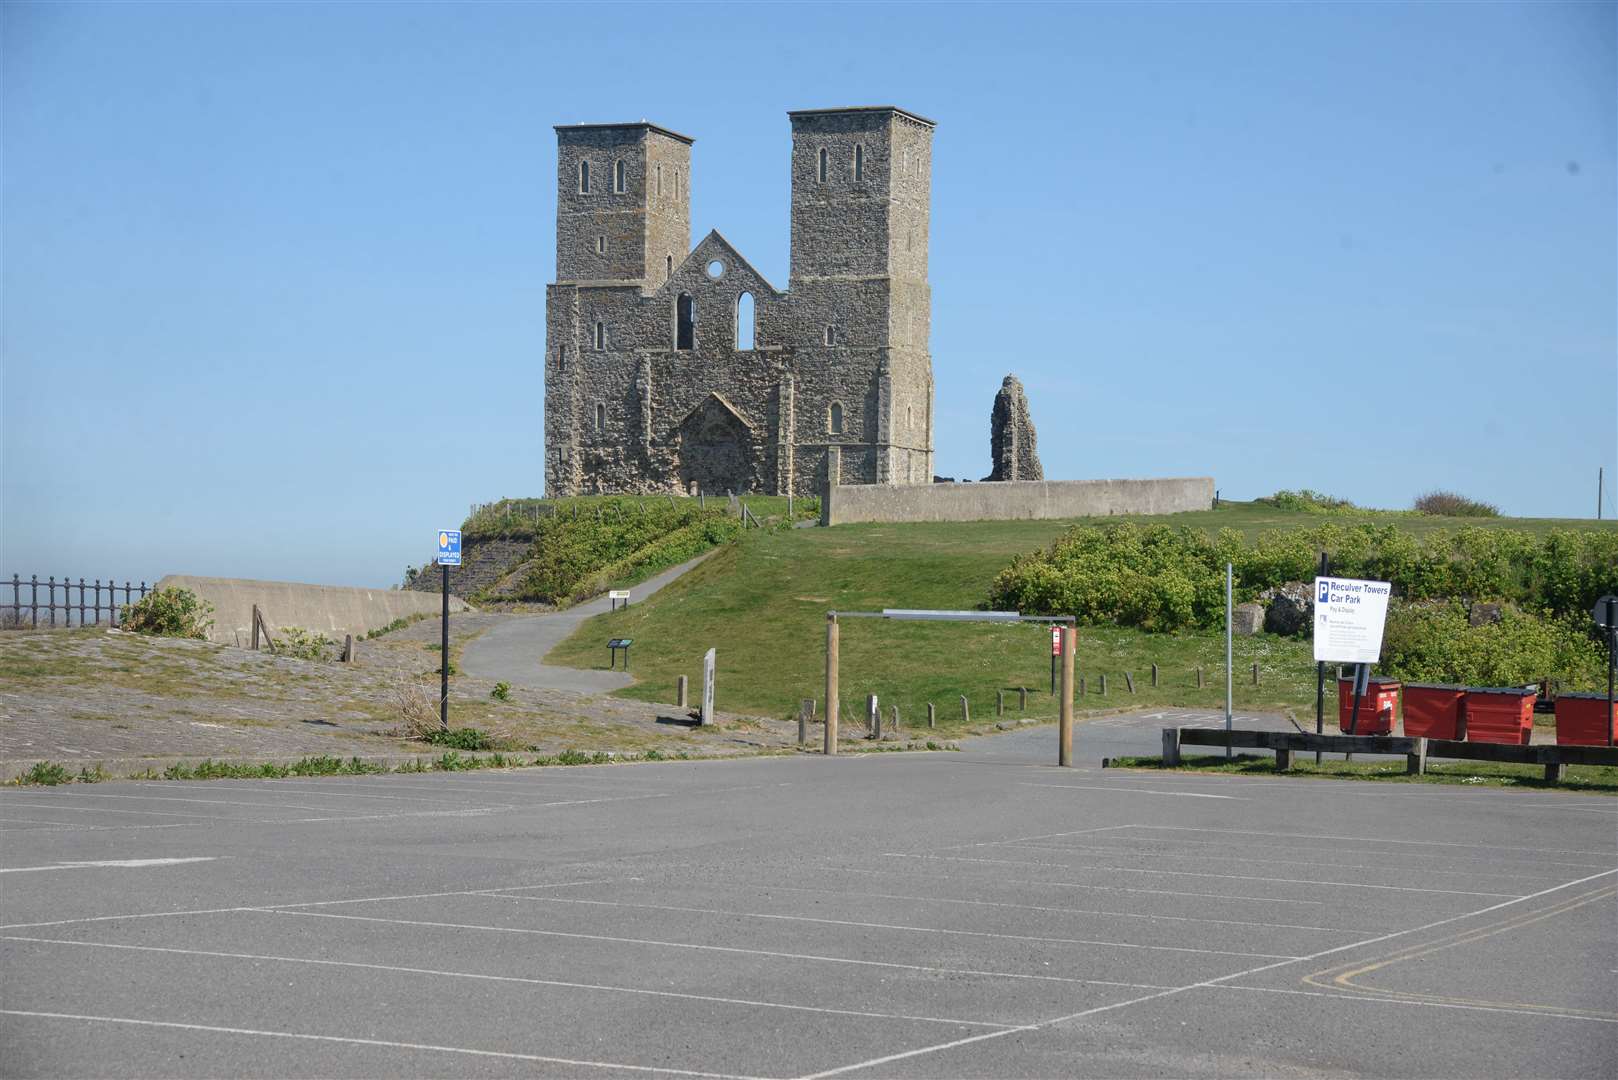 Auric Goldfinger ran a factory in Reculver, according to Ian Fleming's original novel. Picture: Chris Davey